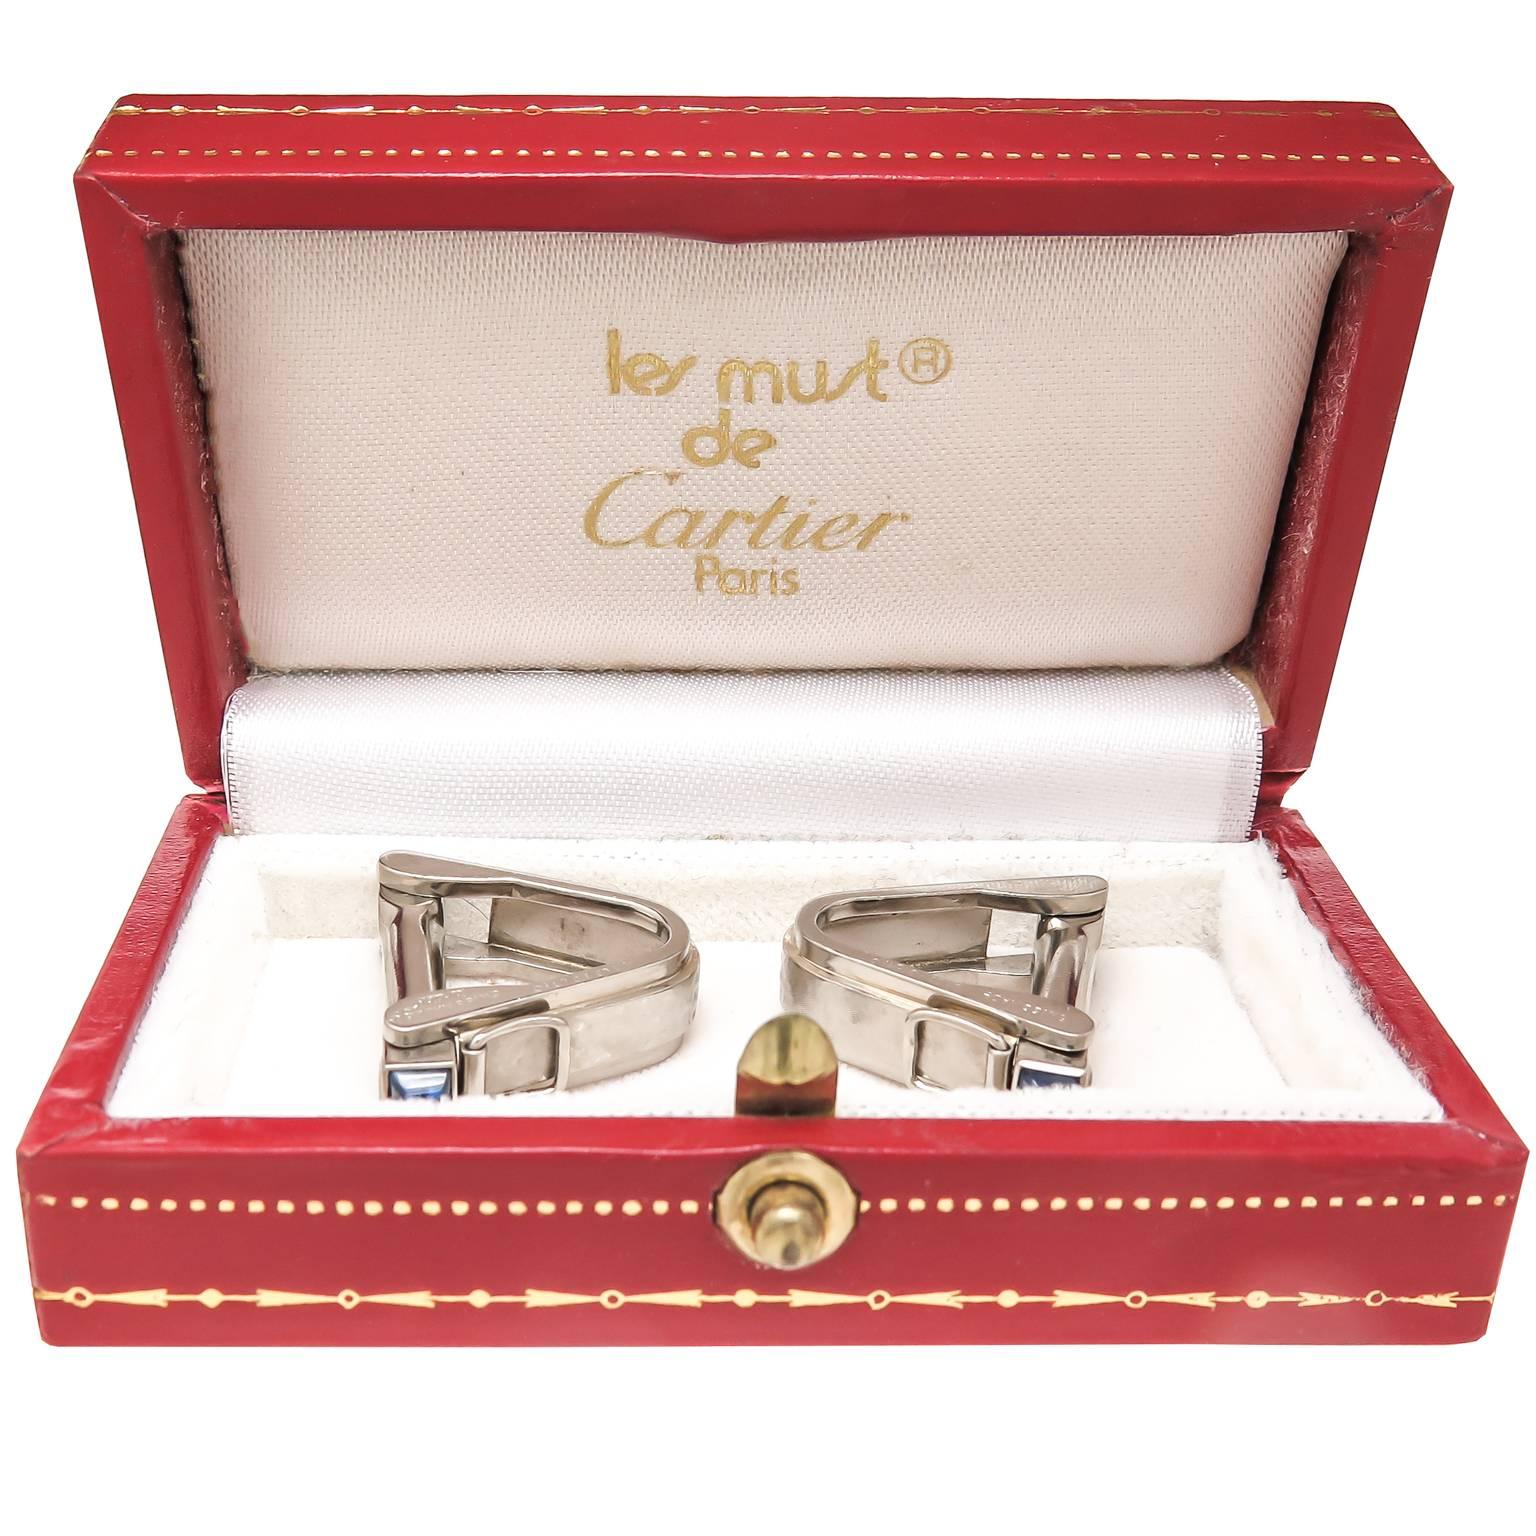 Circa 1990 Cartier 18K White Gold Stirrup form Cufflinks. Having a light brushed finish center and set with Cabochon Sapphires. Signed, numbered and in a Cartier presentation box.